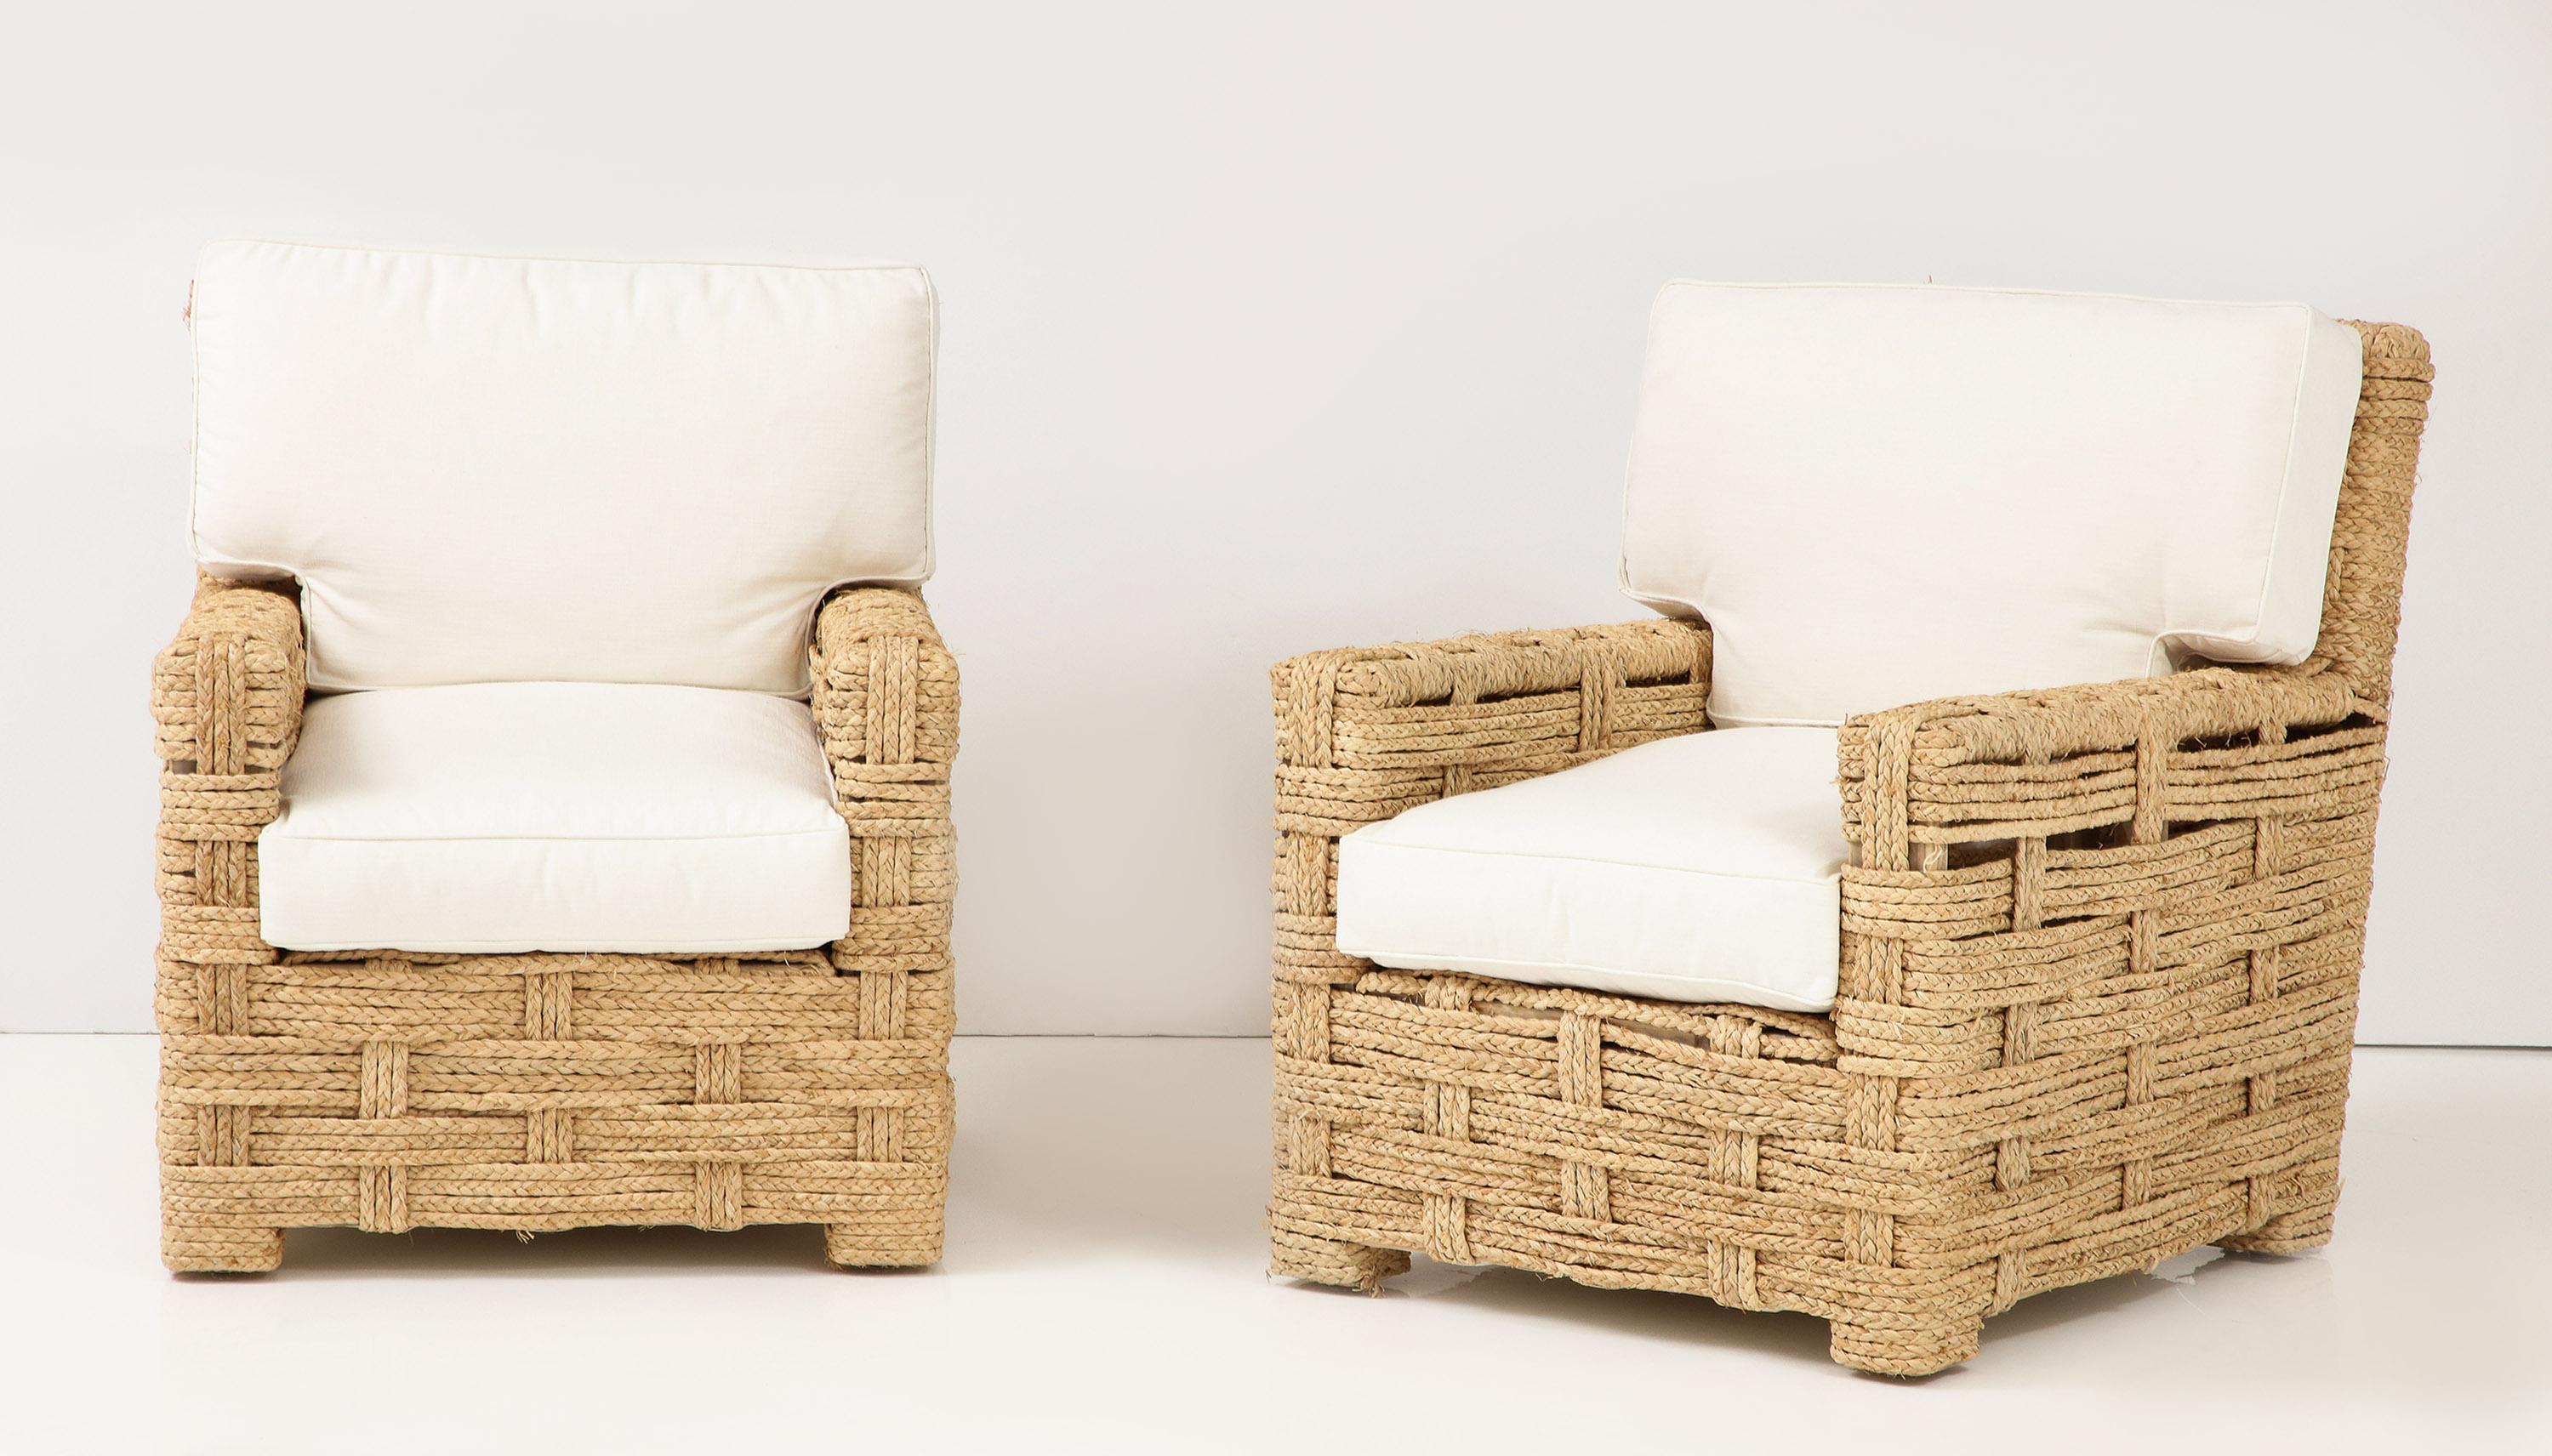 In very fine original condition, each chair is wrapped in braided raffia over an oak frame.
- Seat H.17.32